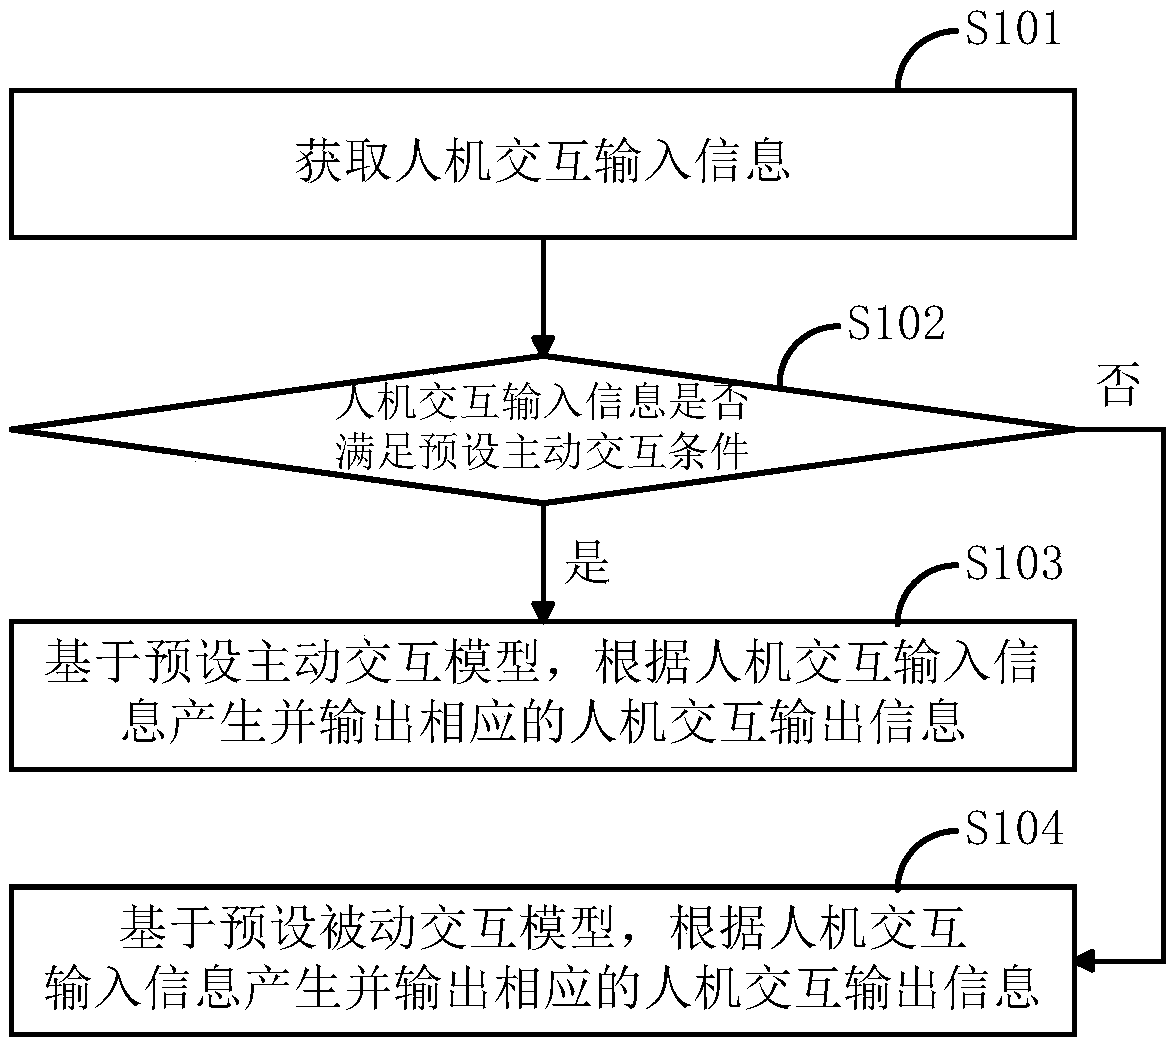 Intelligent robot based interaction method and device, and intelligent robot